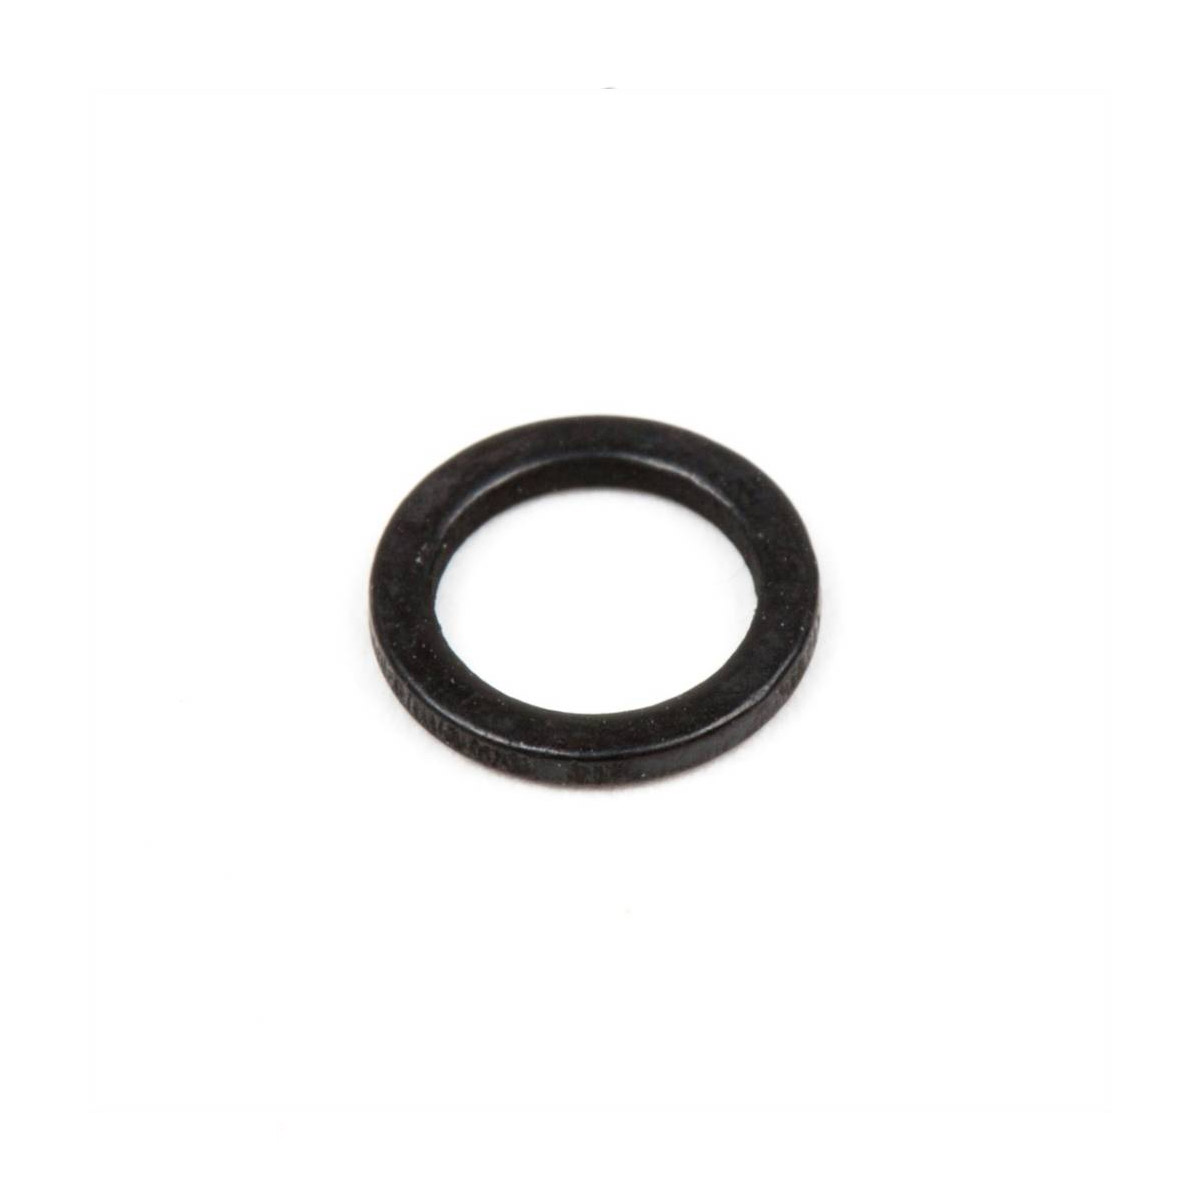 Rig Solutions Black Coated Rig Rings